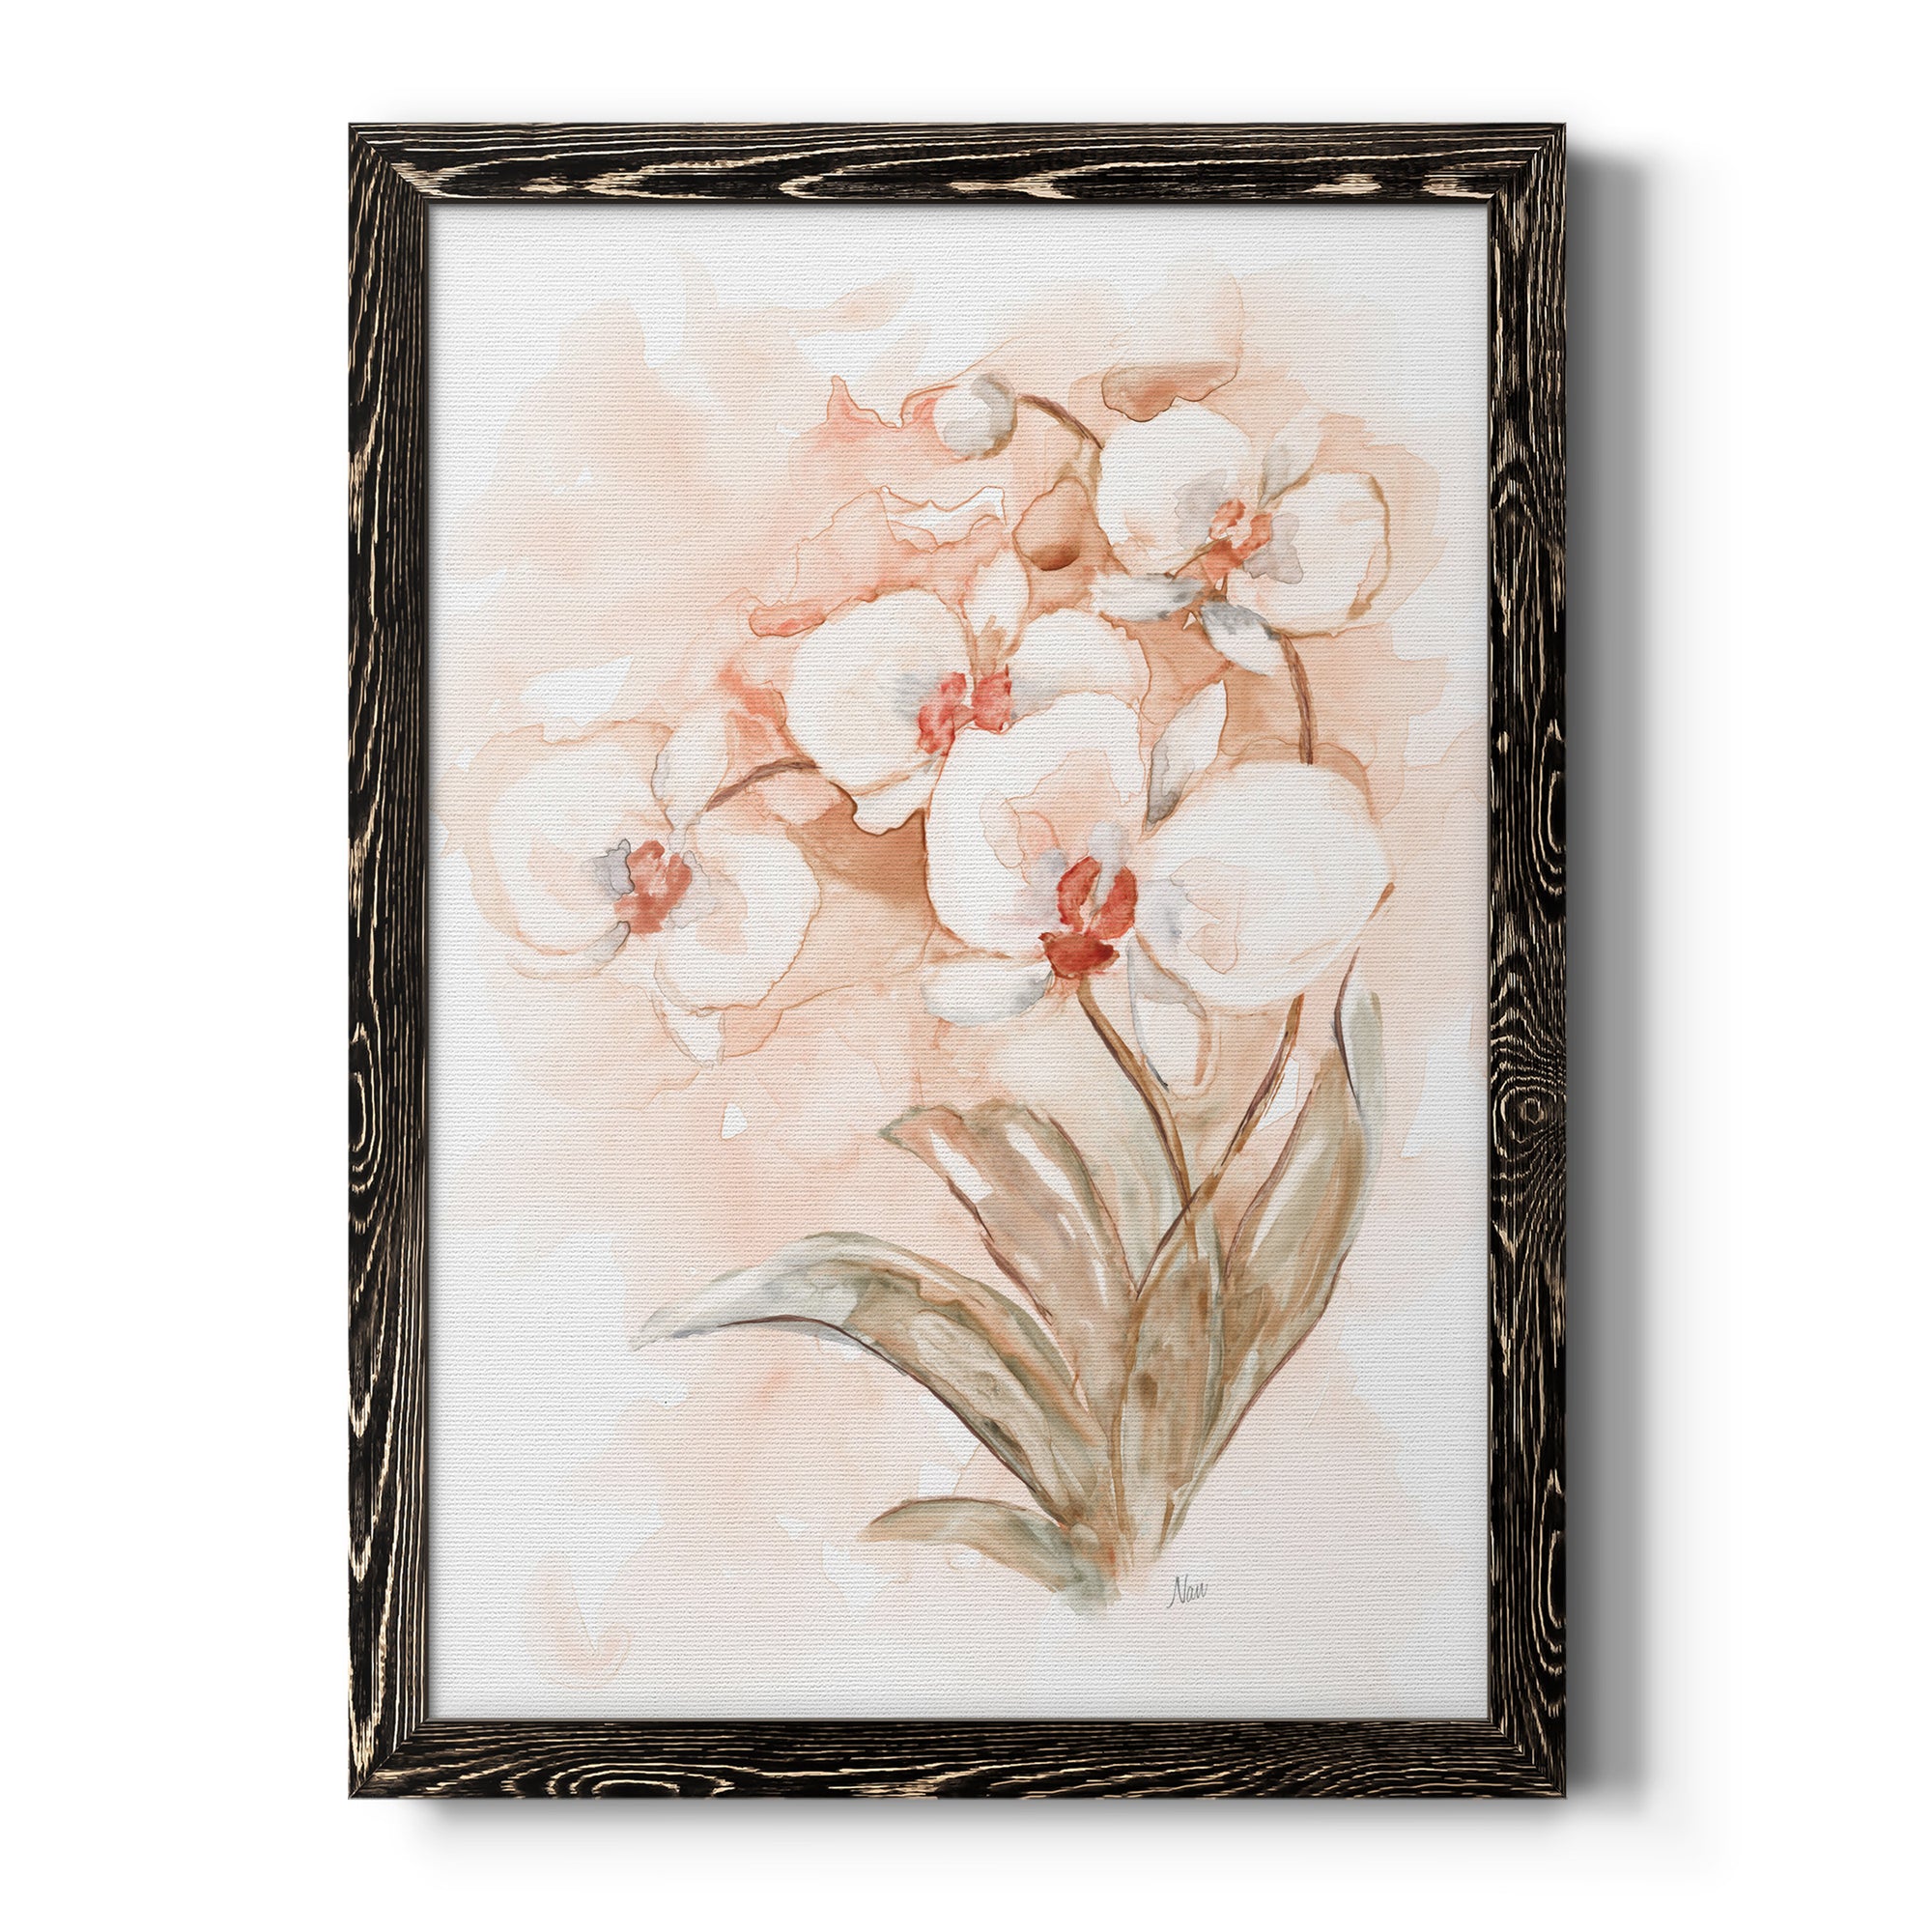 White and Coral Orchid II - Premium Canvas Framed in Barnwood - Ready to Hang